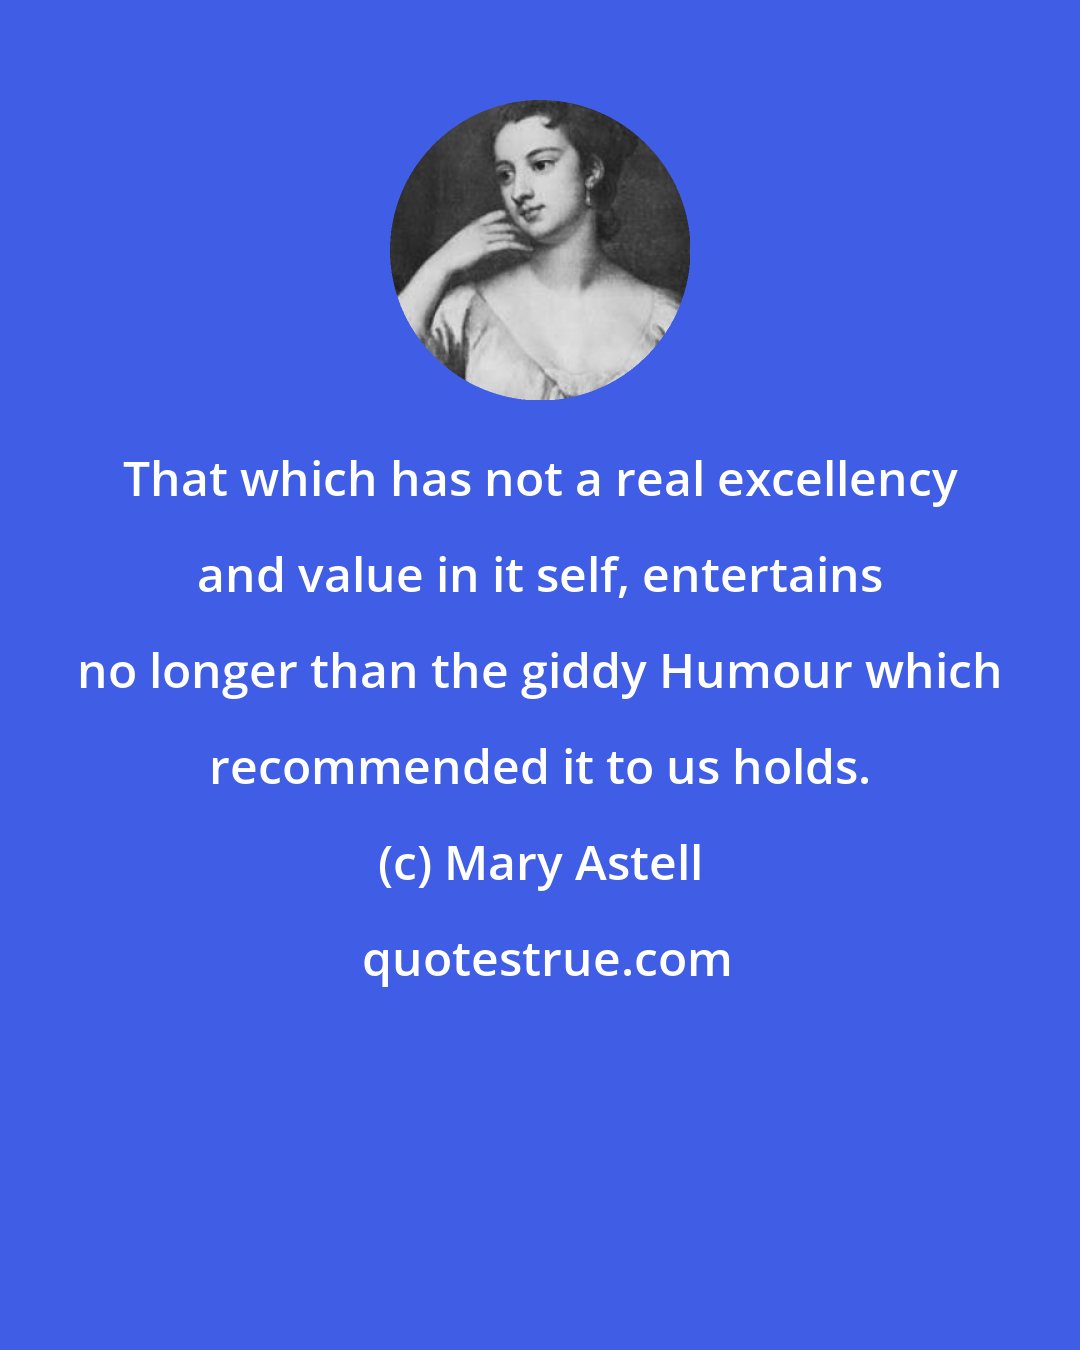 Mary Astell: That which has not a real excellency and value in it self, entertains no longer than the giddy Humour which recommended it to us holds.